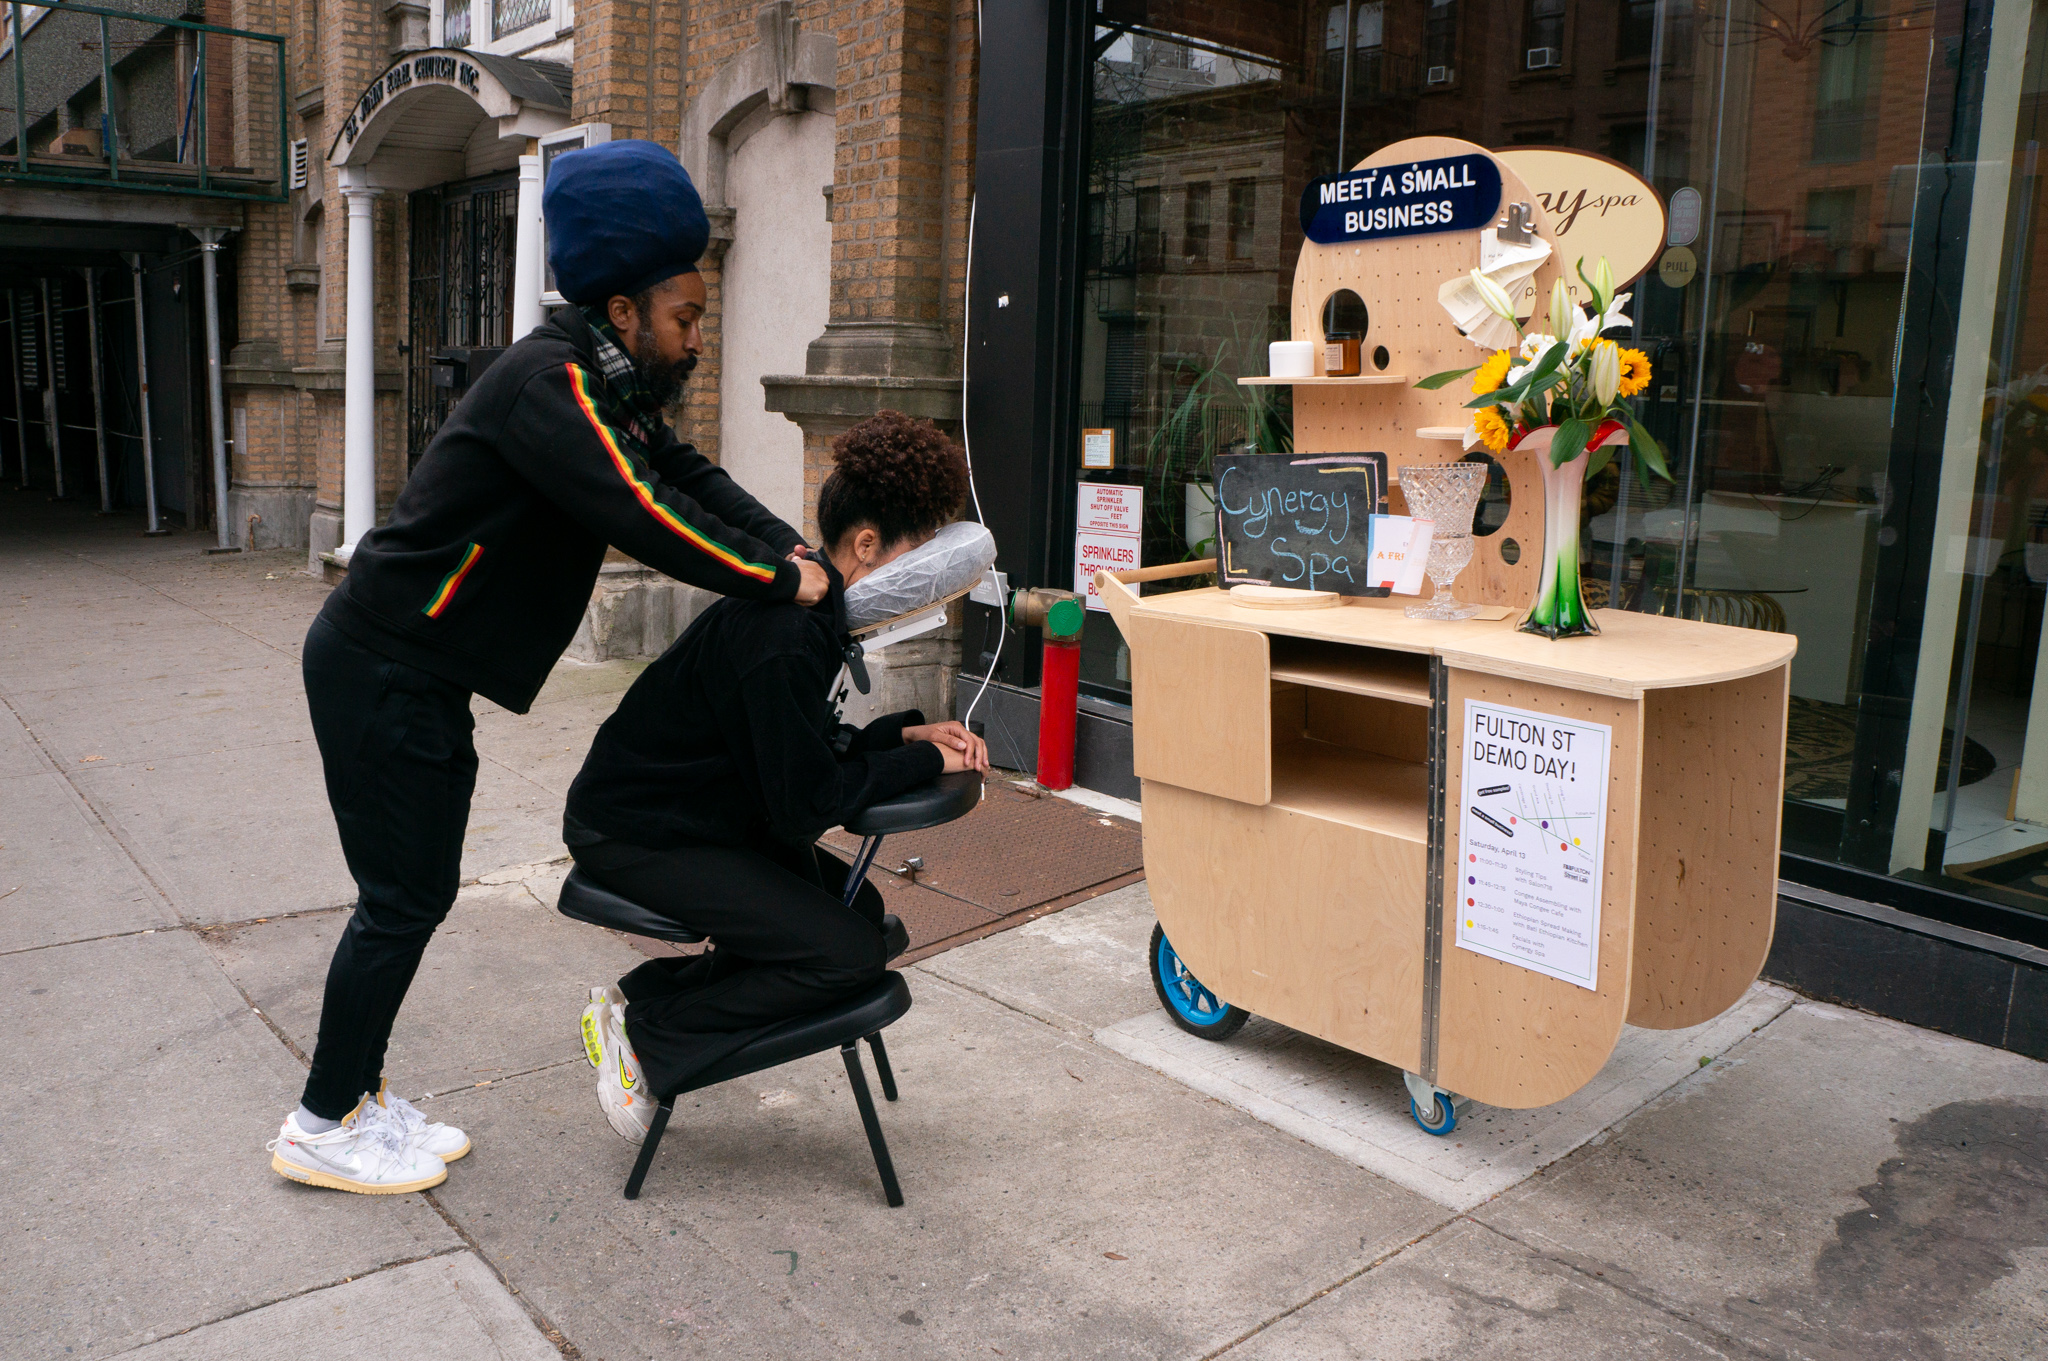 A masseur demonstrating a massage session on the street in front of the storefront.